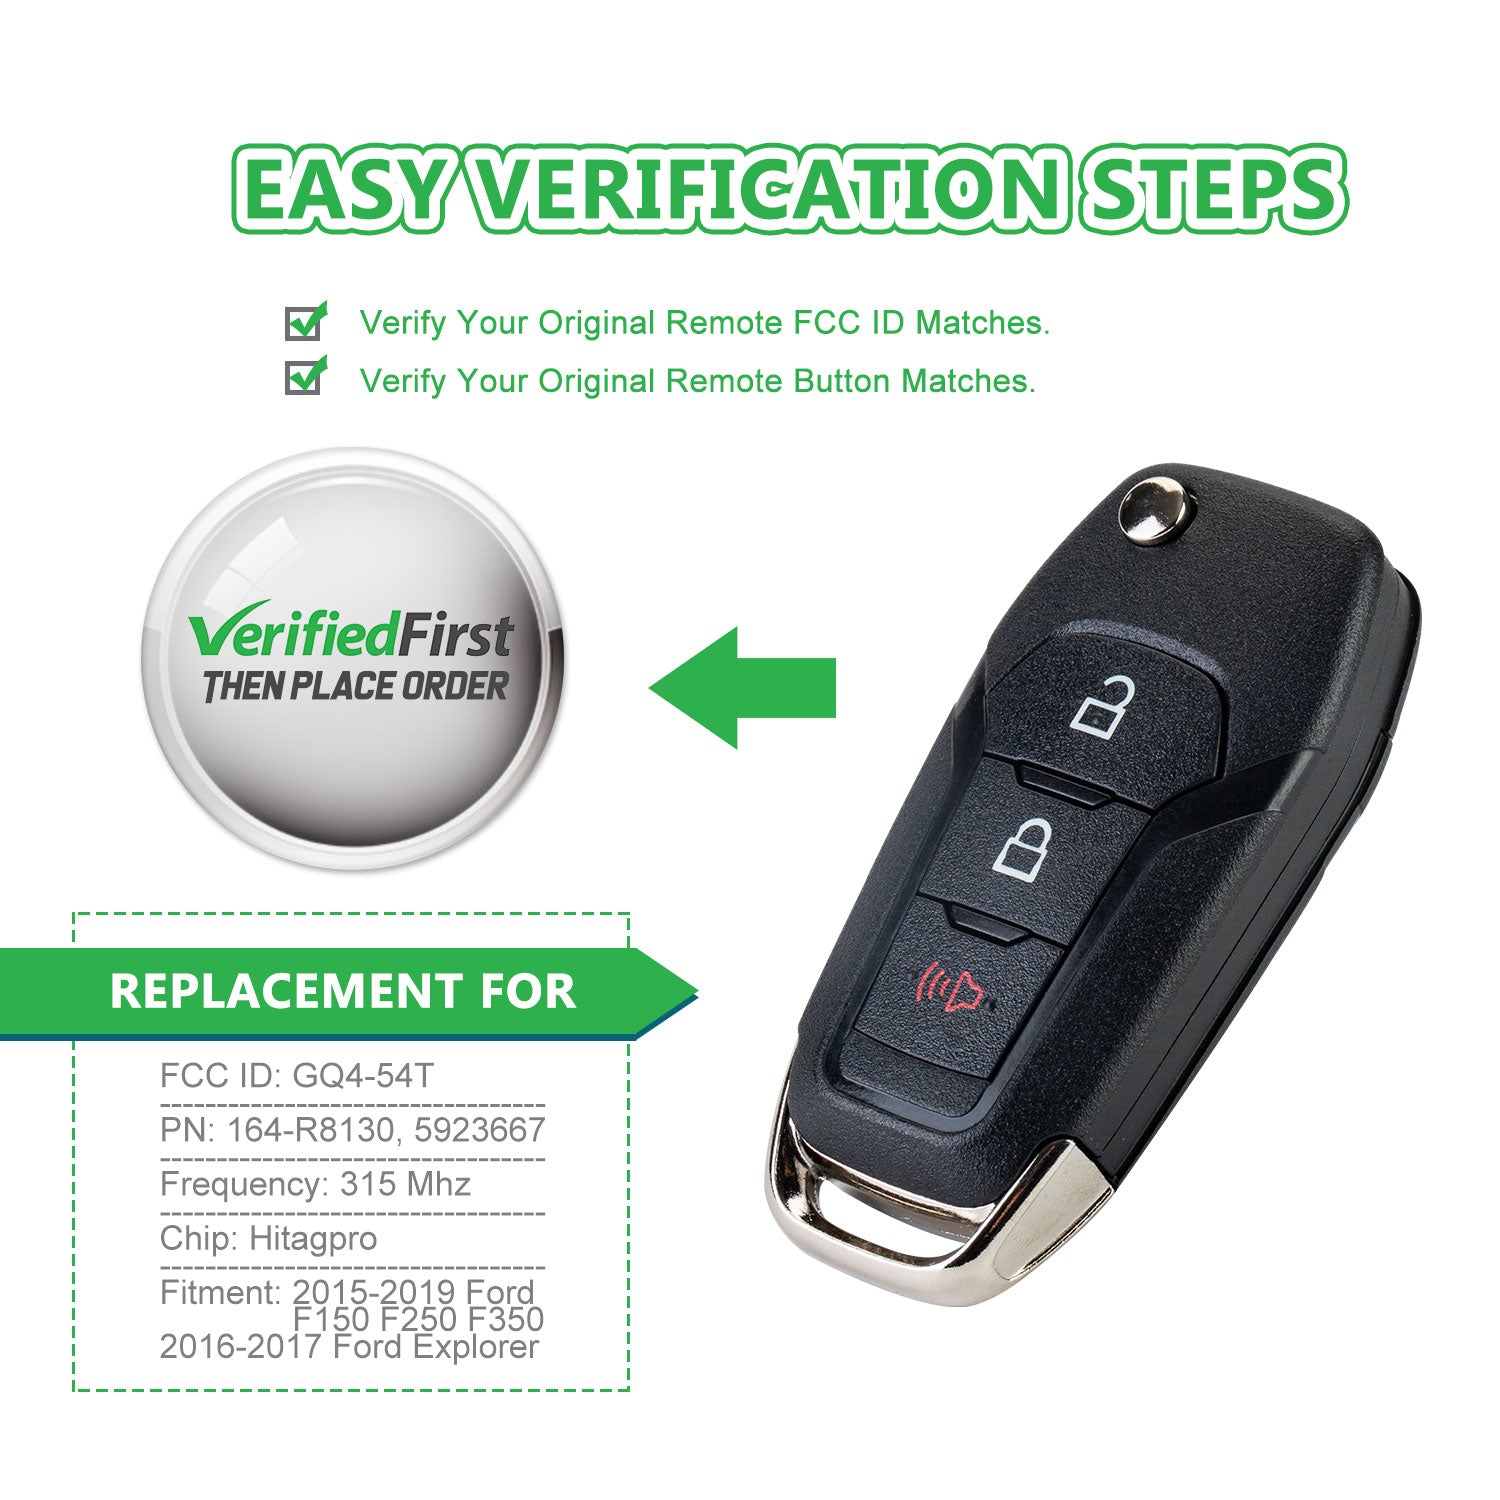 Extra-Partss Remote Car Key Fob Replacement for Ford N5F-A08TAA 164-R8130 fits 2015 2016 2017 2018 2019 F150 F250 F350